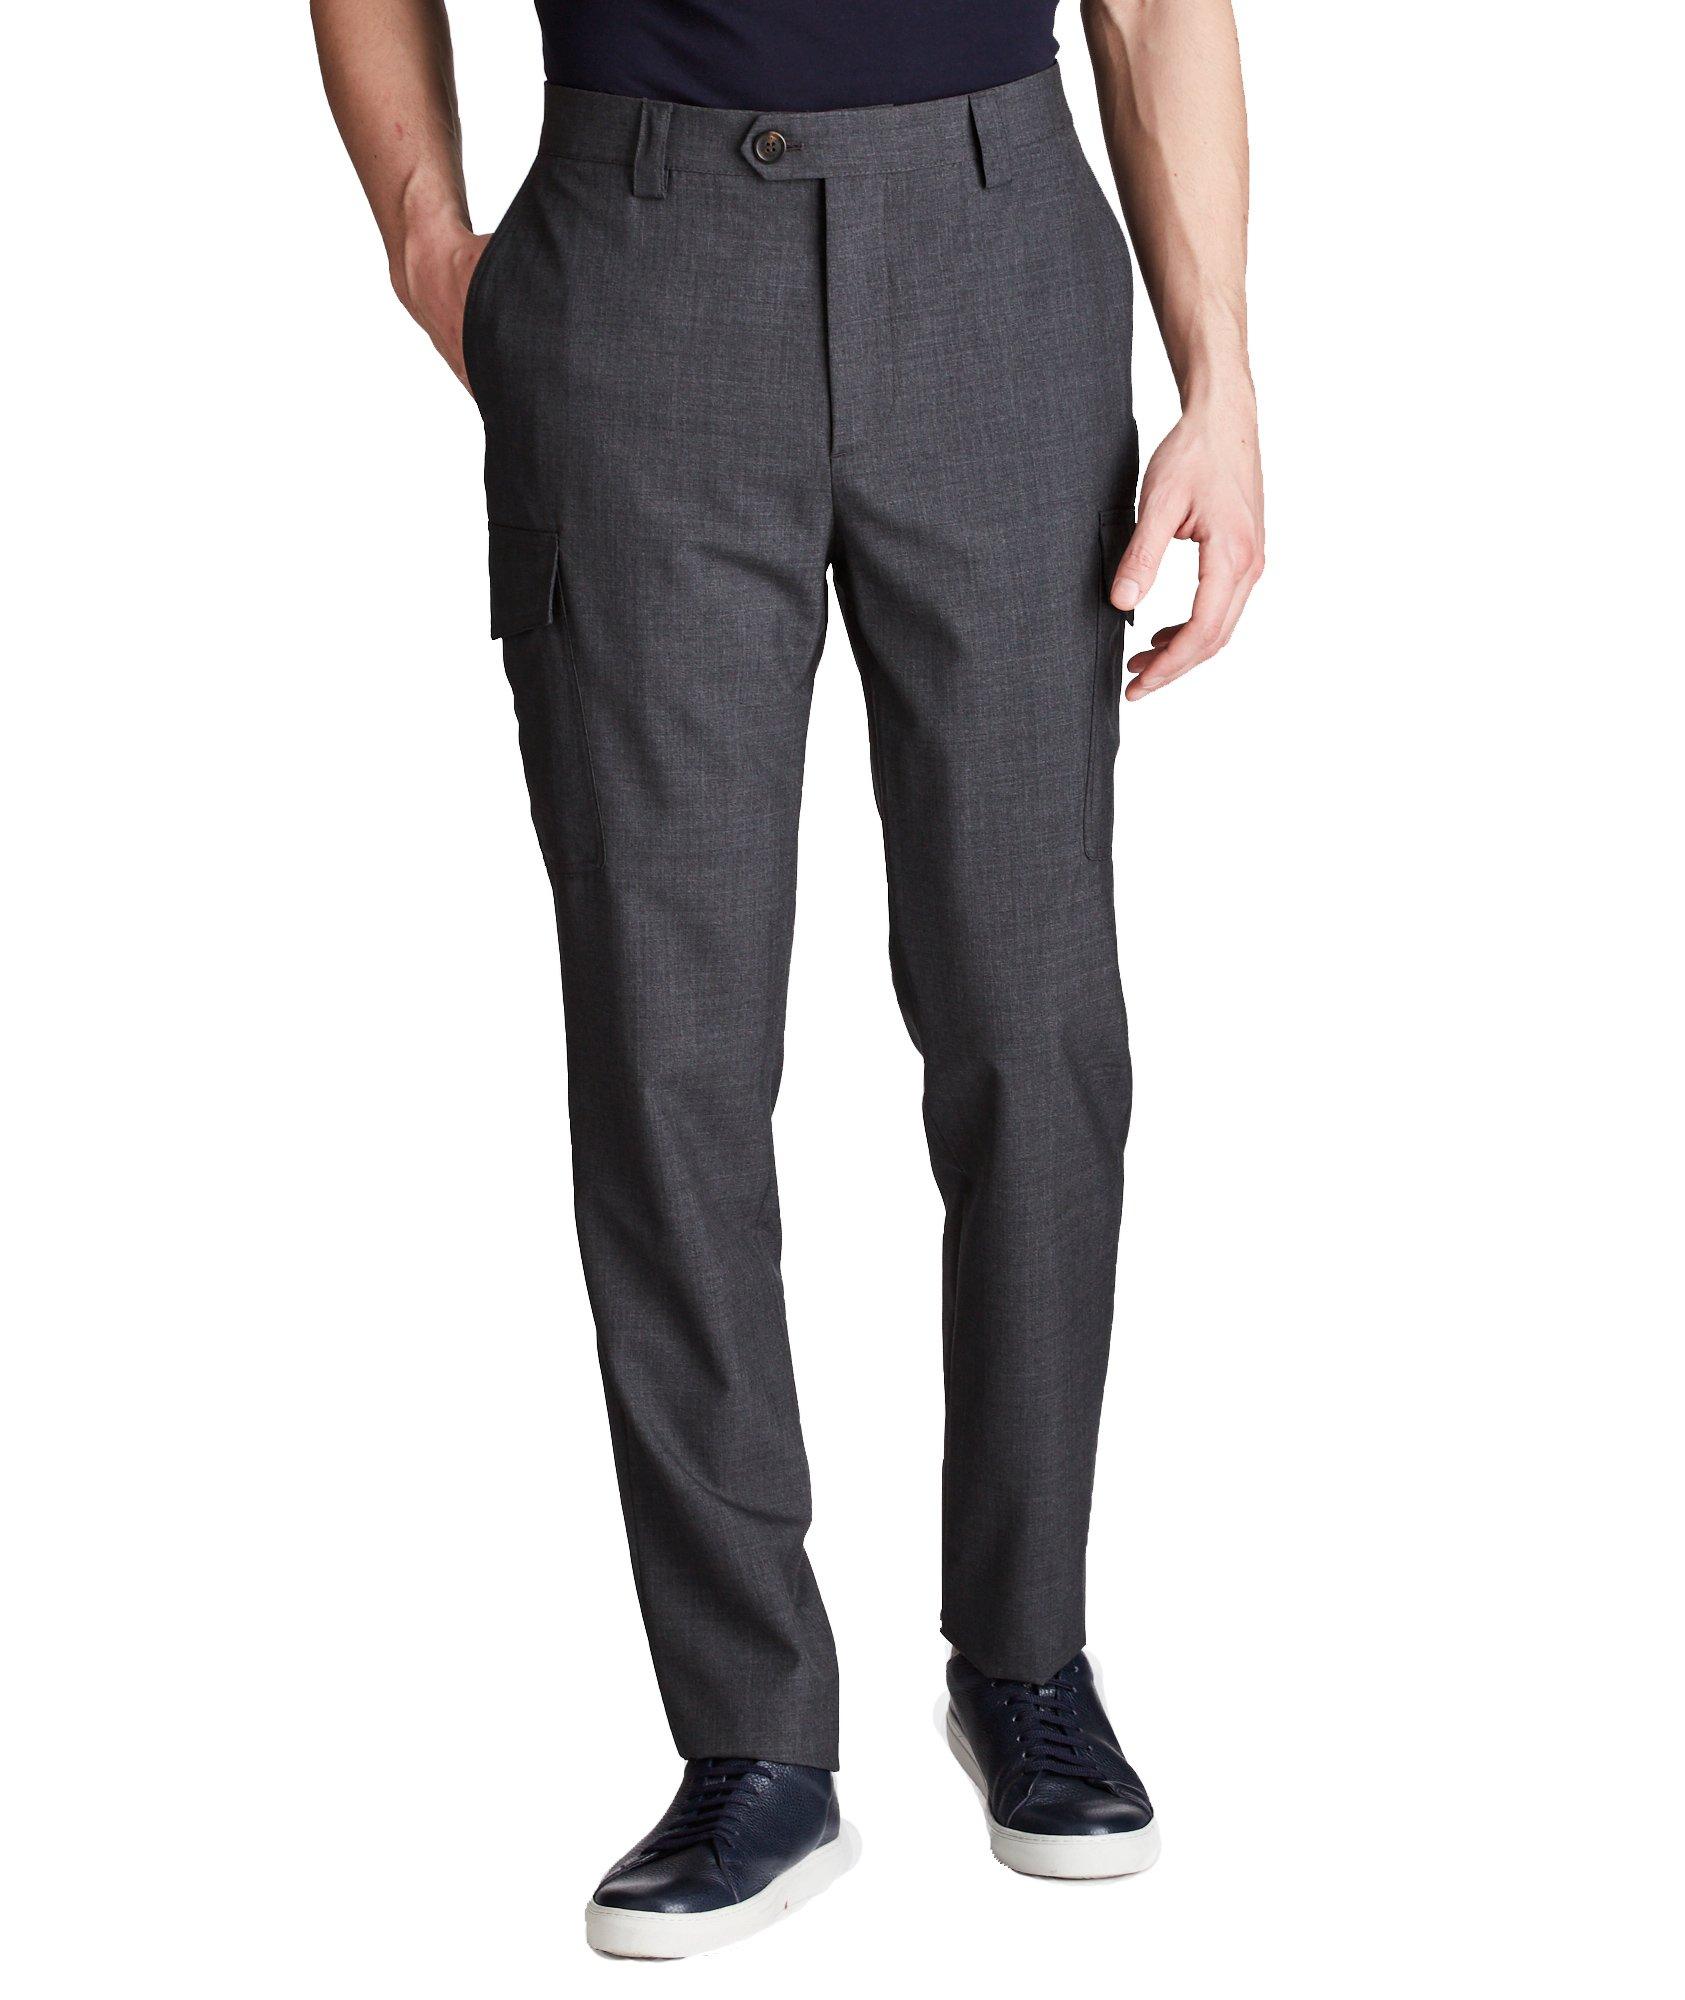 Contemporary Fit Cargo Pants image 0